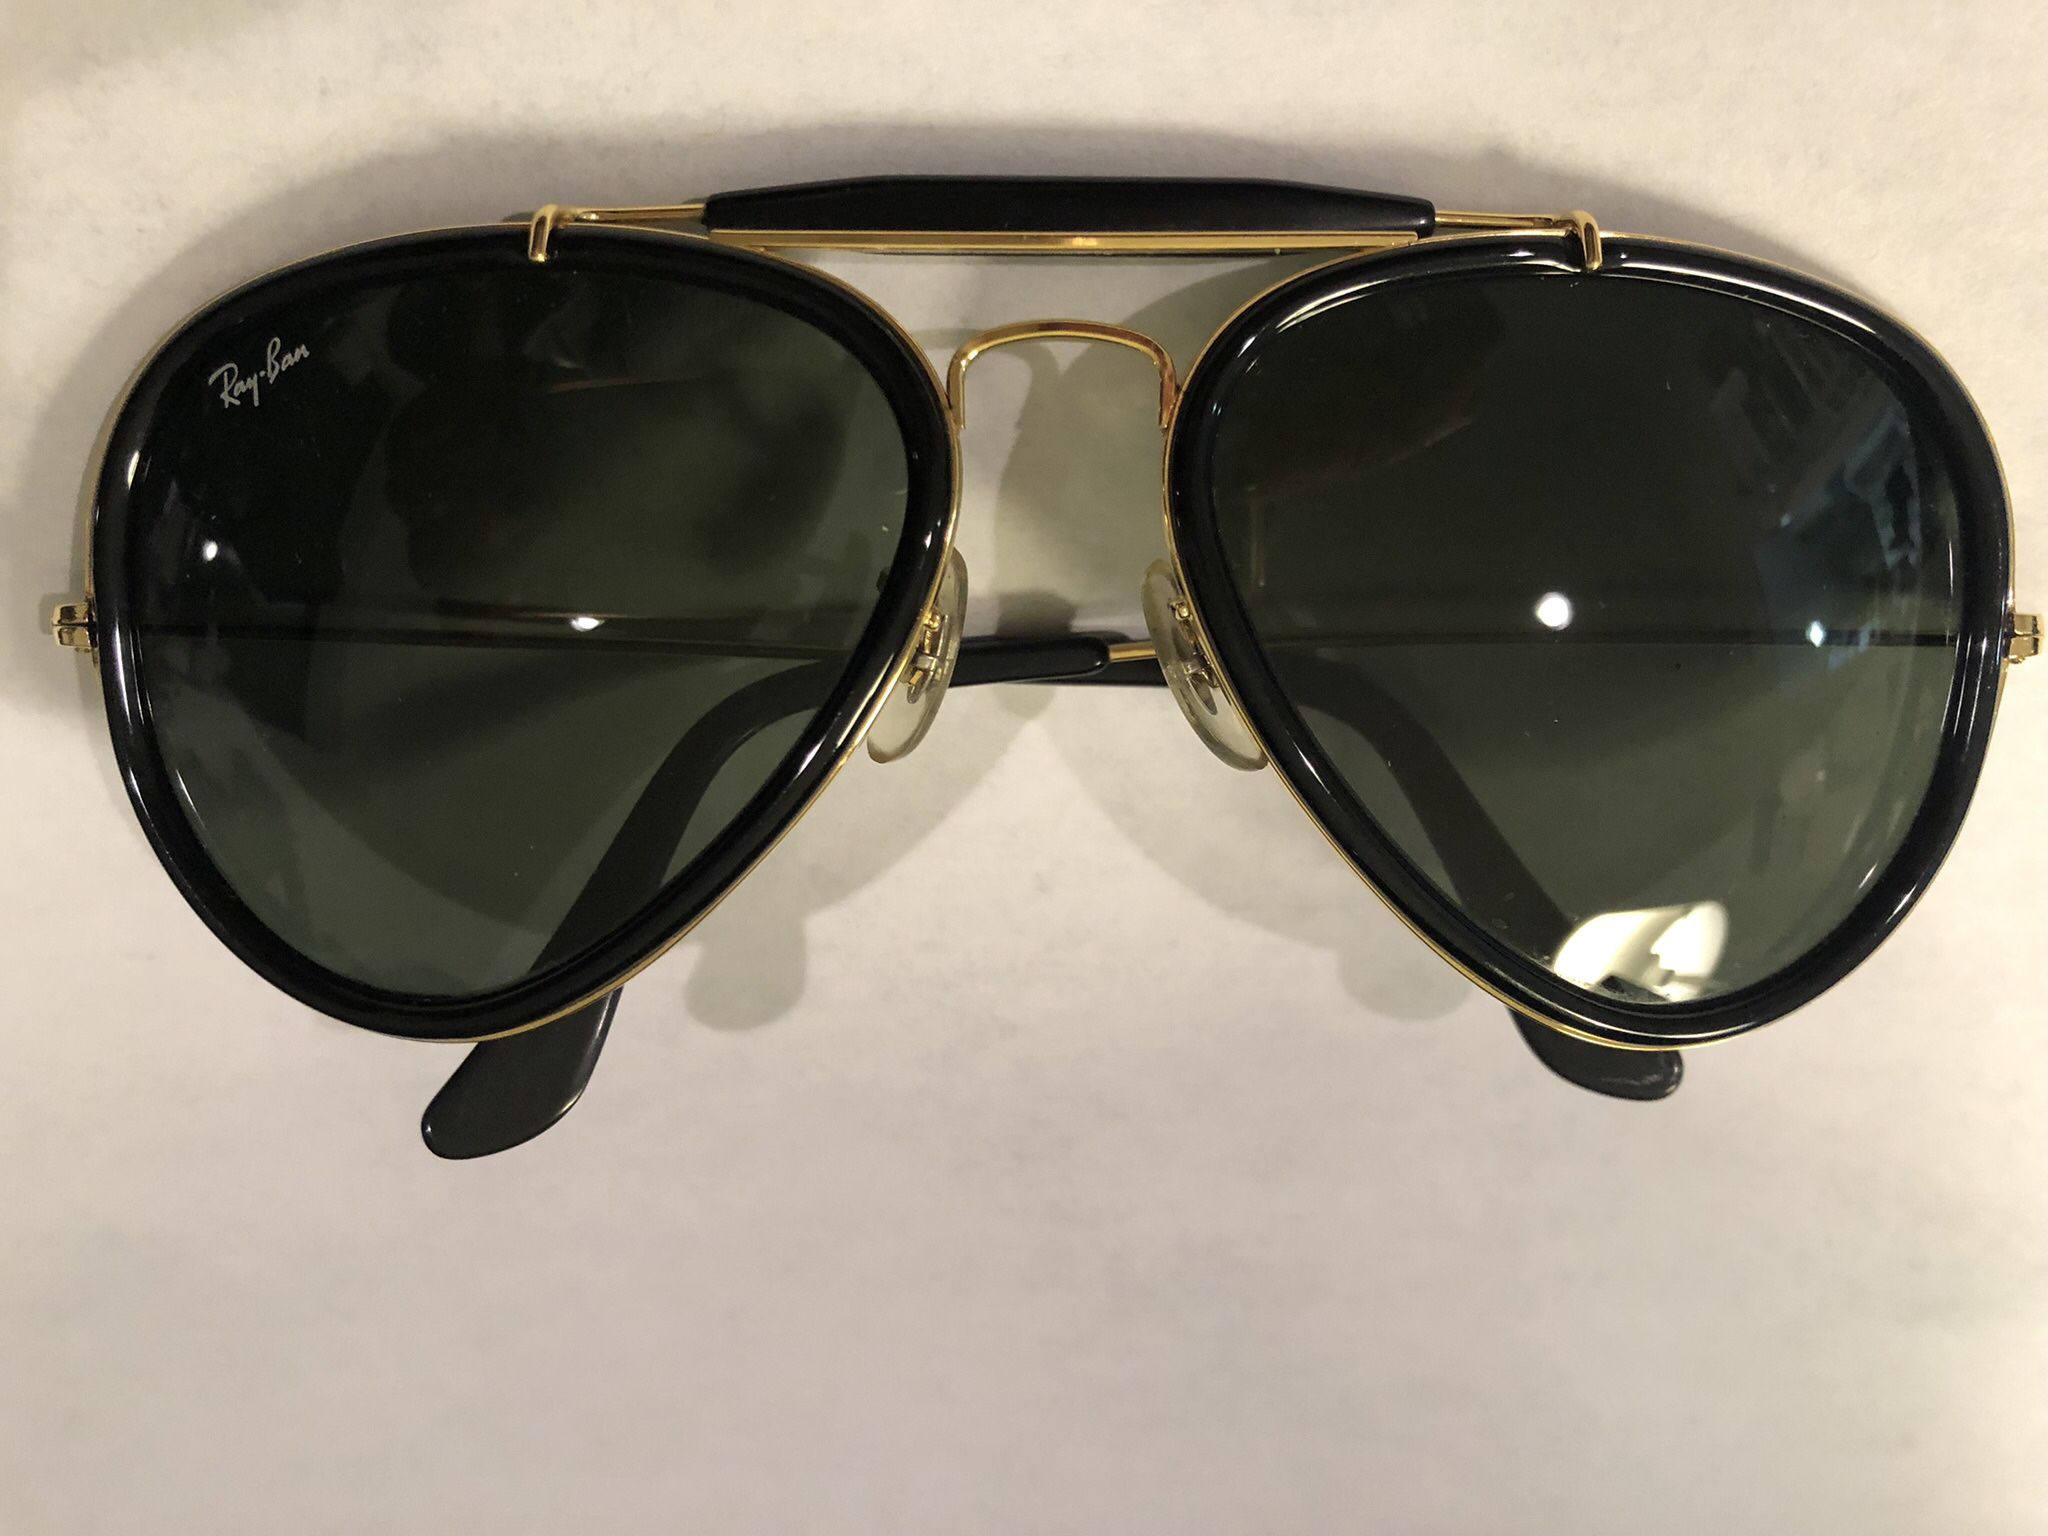 Vintage Ray Ban Aviator Sunglasses, Bausch & Lomb, Gold Frame With Bold  Black Trim for Sale in San Diego, CA - OfferUp